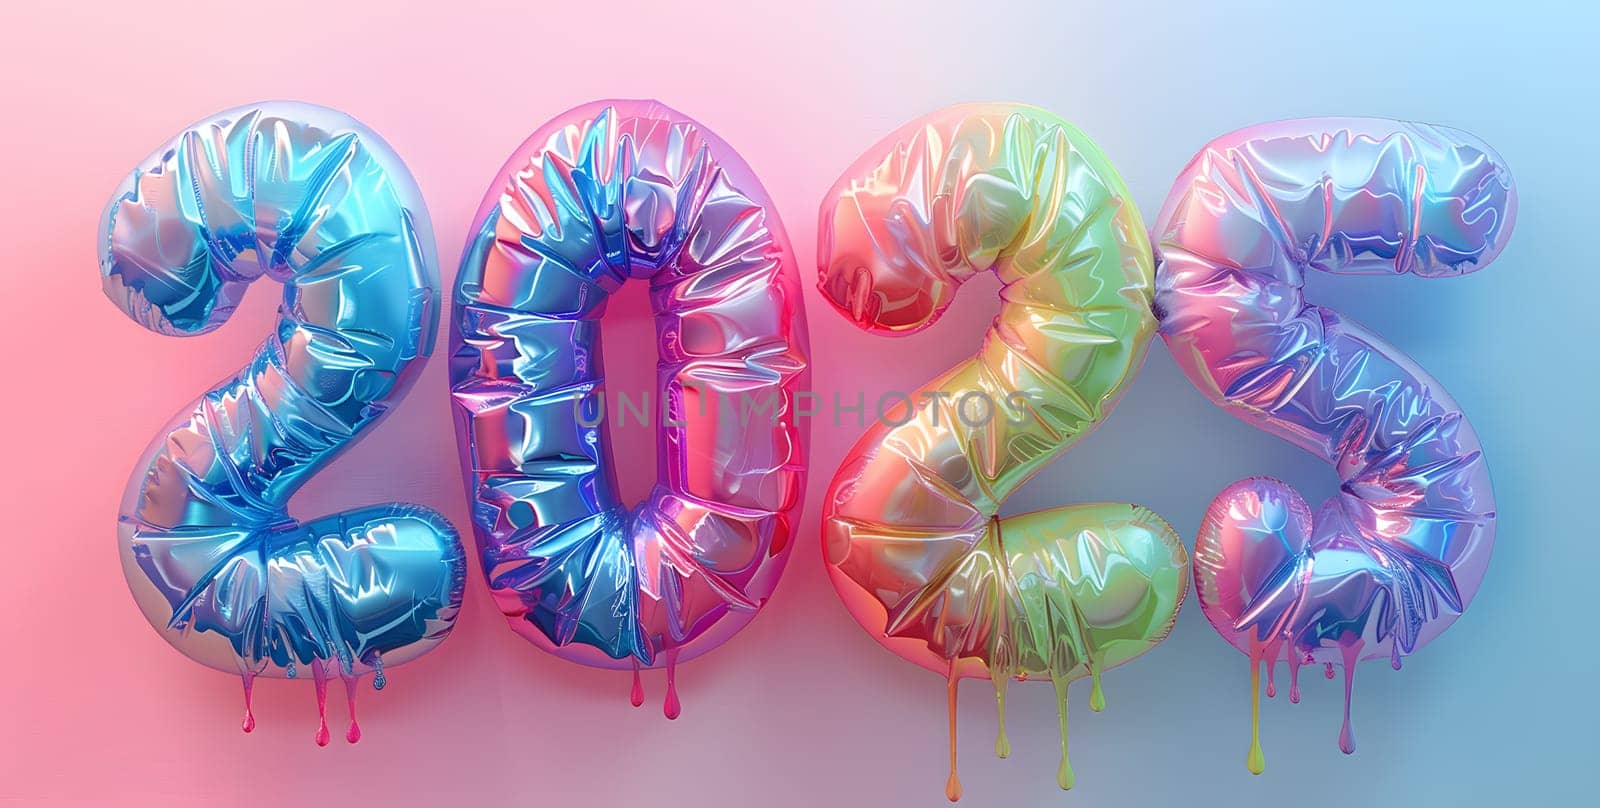 2022 depicted with colorful balloons on a pink and electric blue background by Nadtochiy